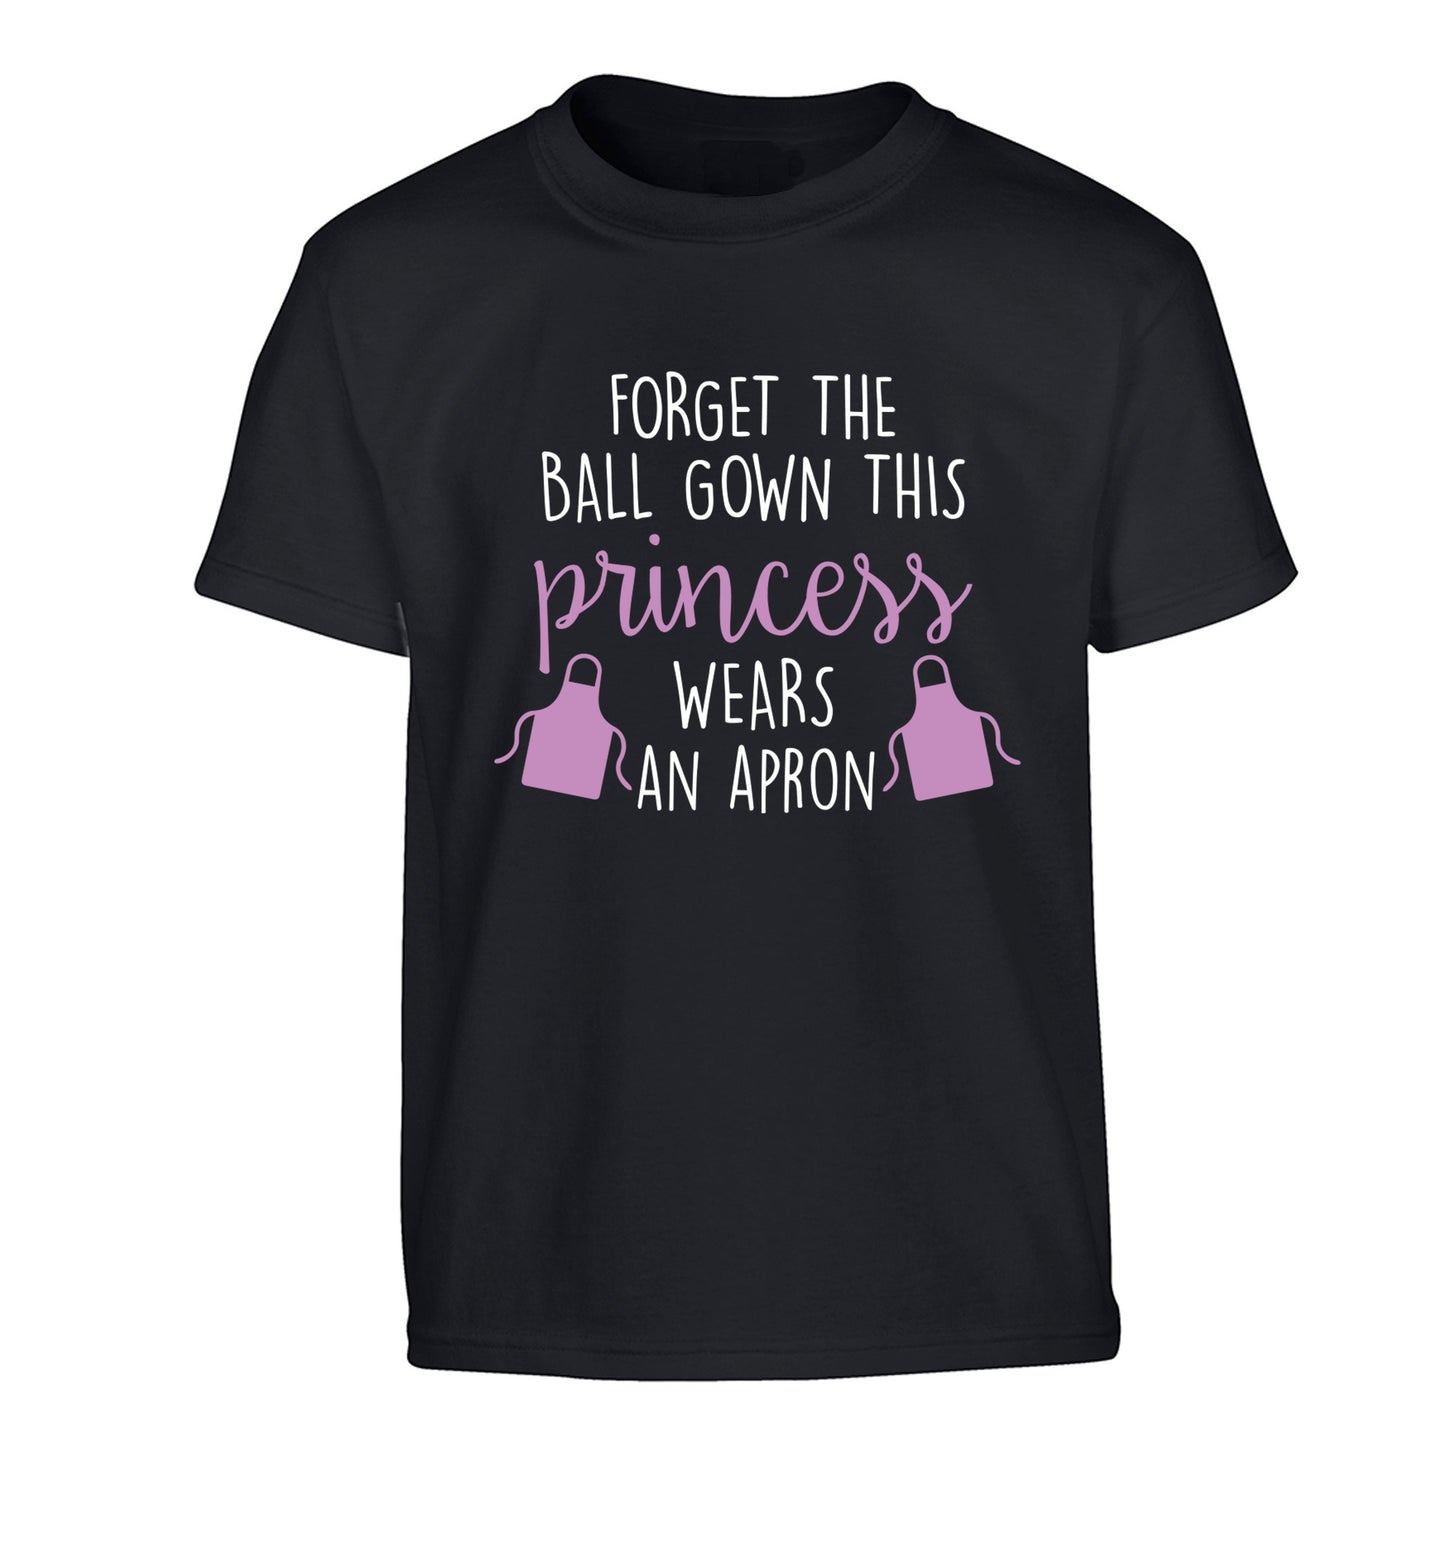 Forget the ball gown this princess wears an apron Children's black Tshirt 12-14 Years